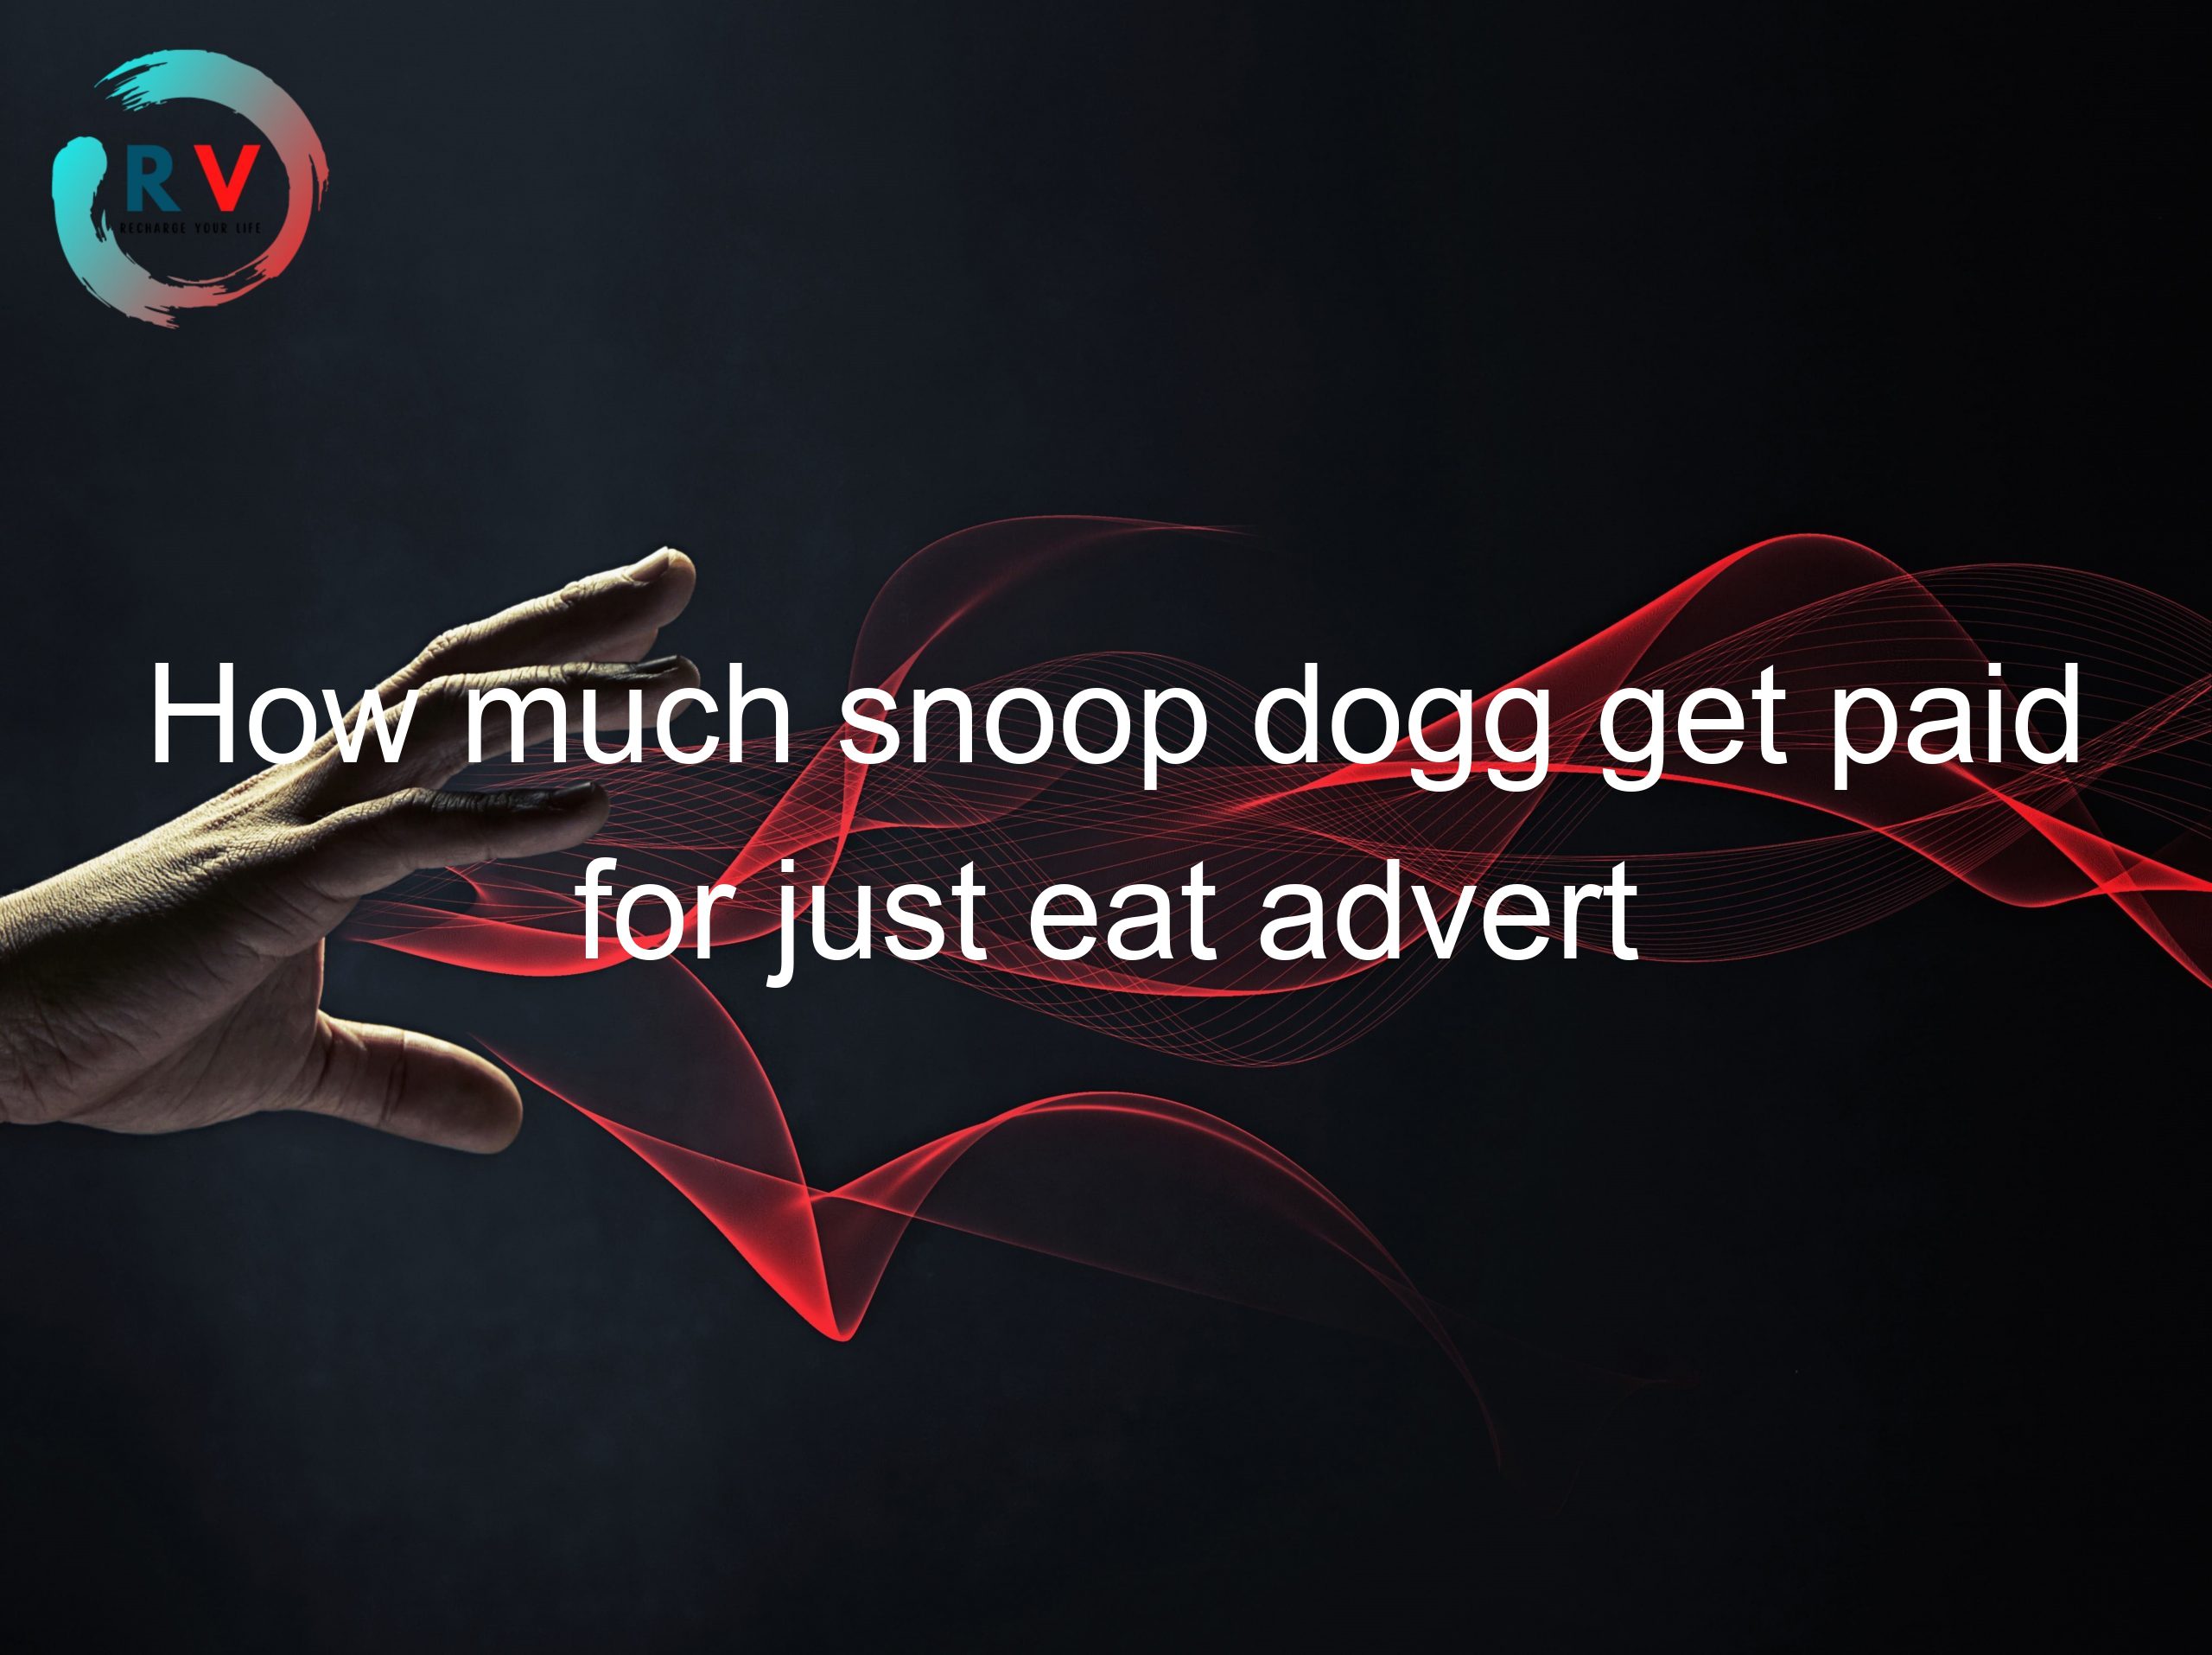 How much snoop dogg get paid for just eat advert